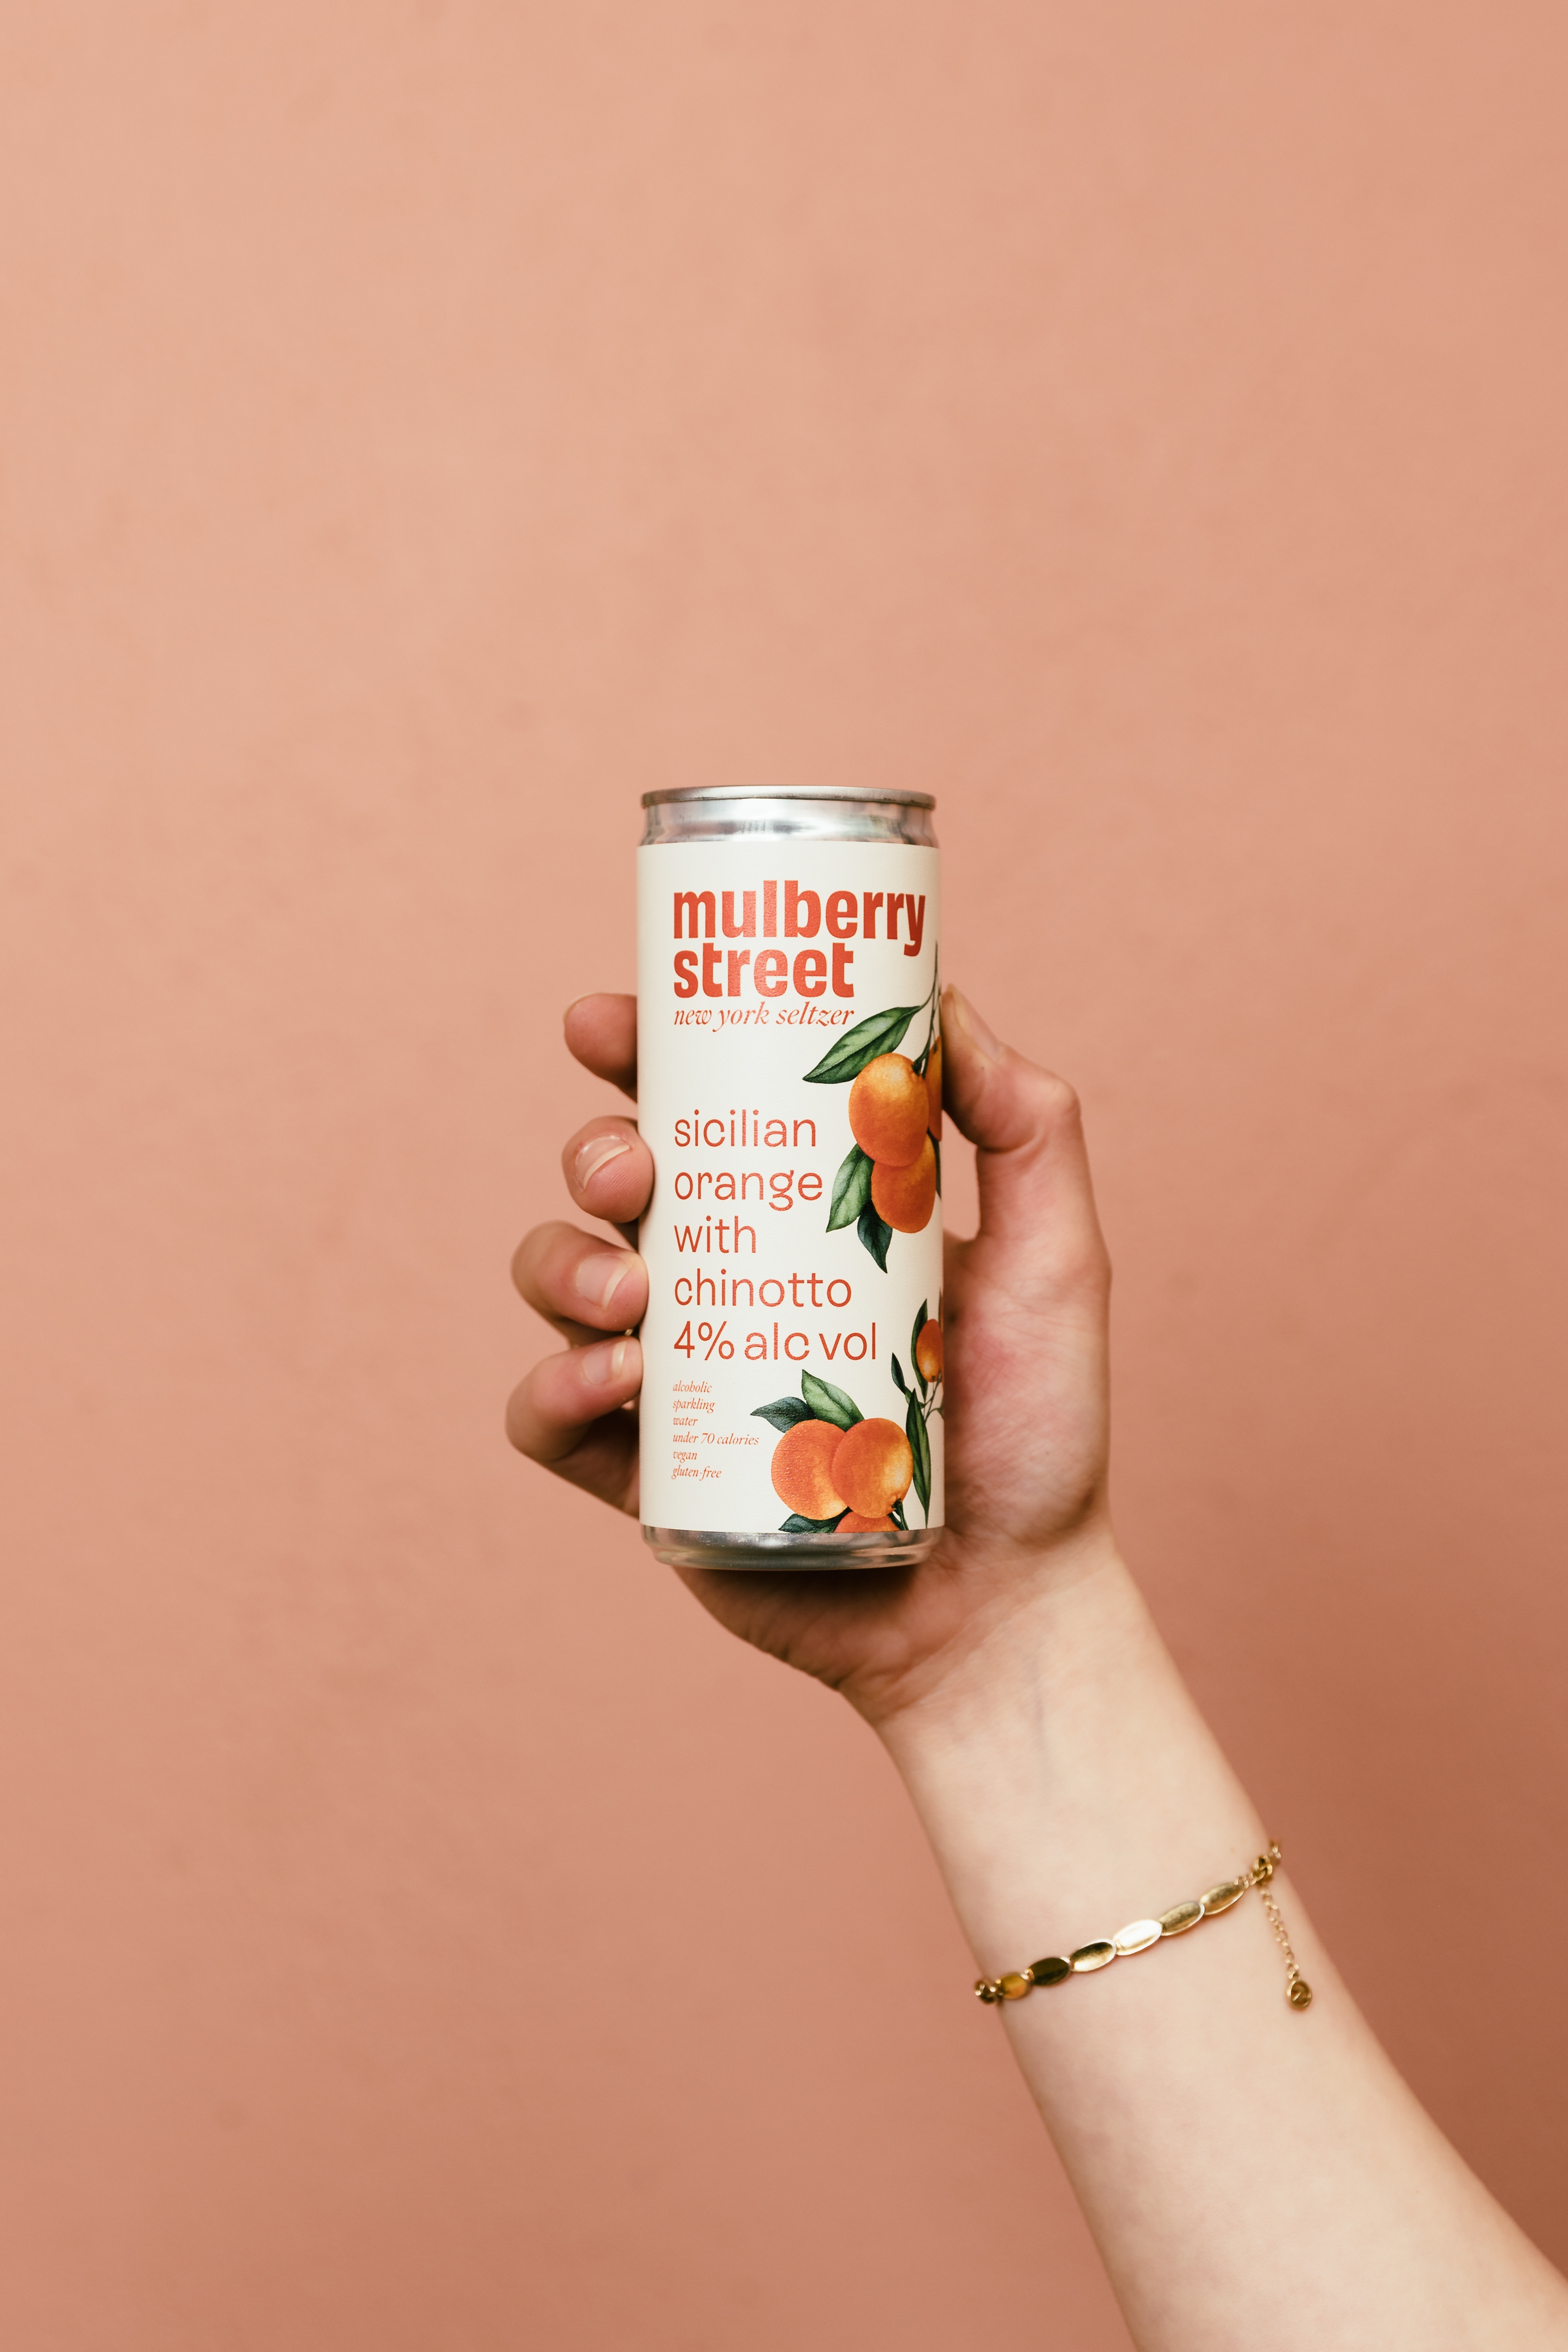 A hand holding a can of Mulberry Street Orange Seltzer